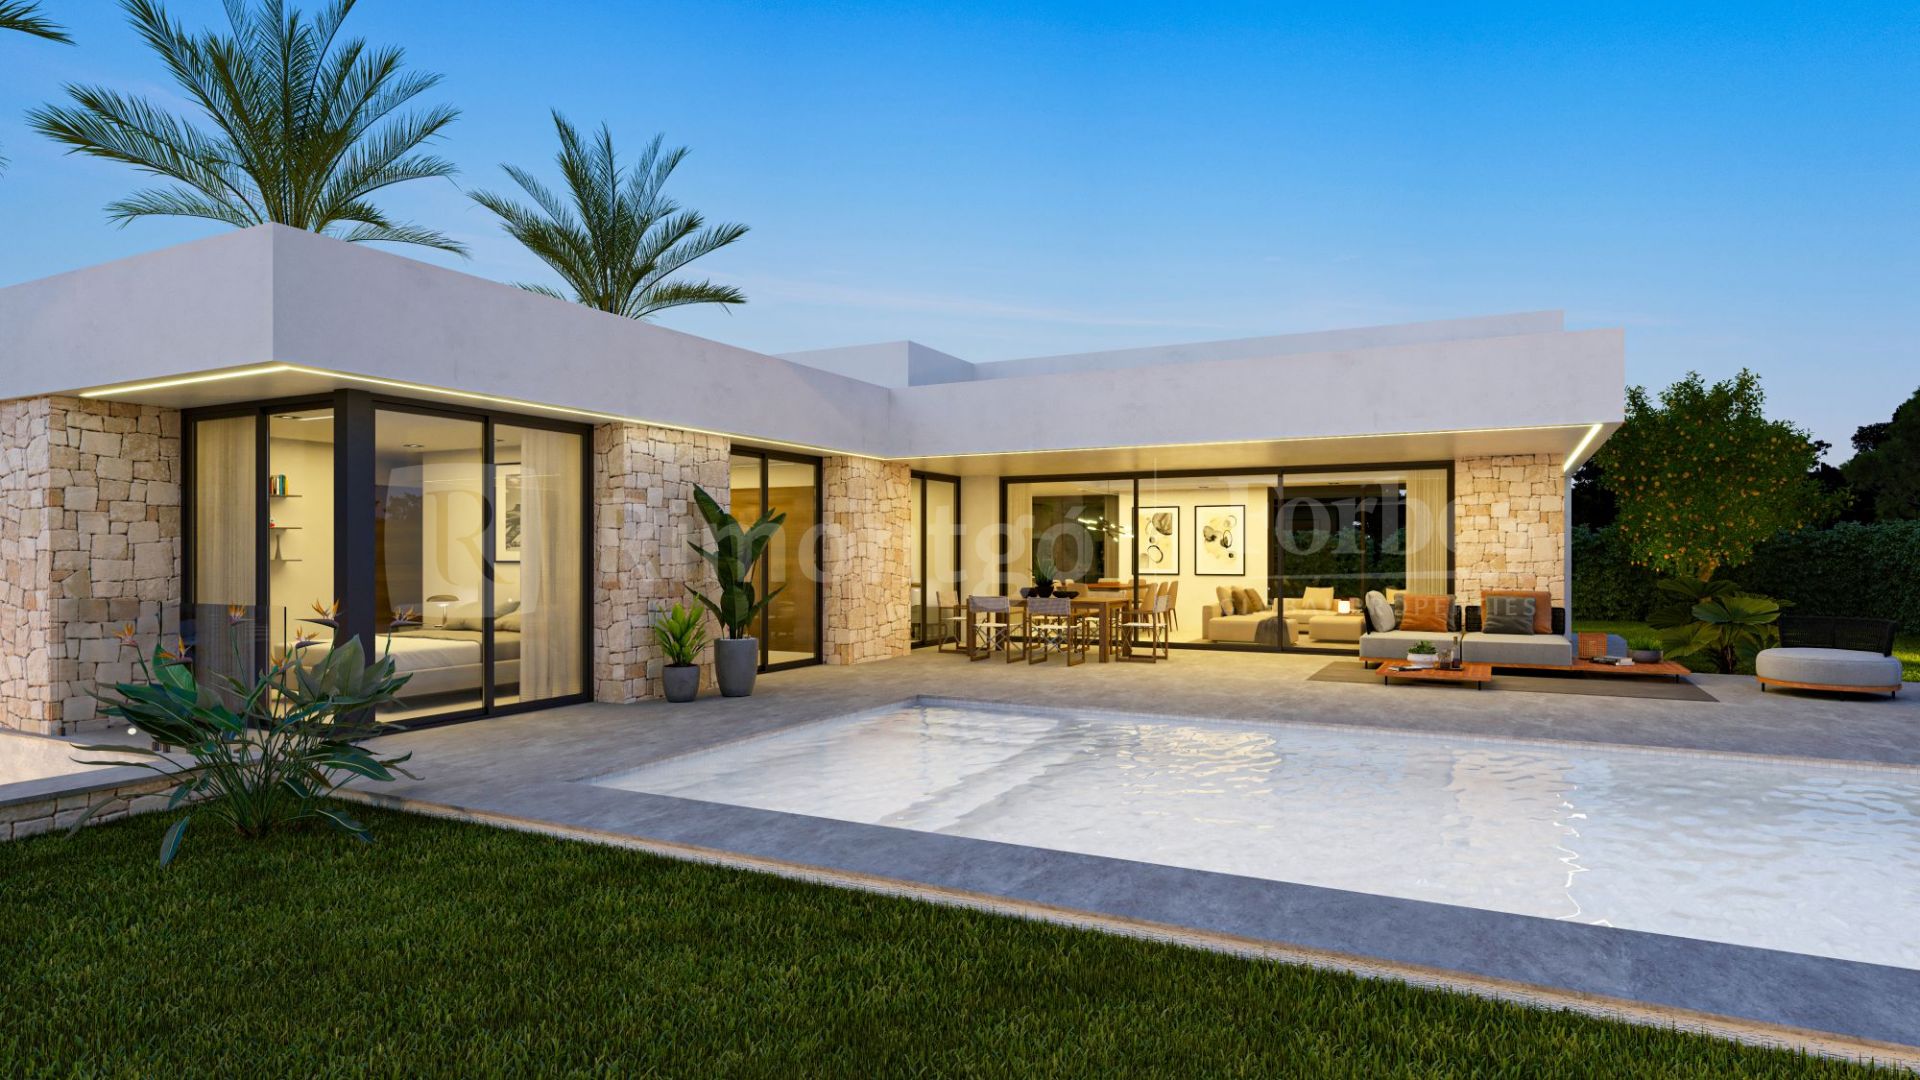 Brand-new villa project located in Dénia